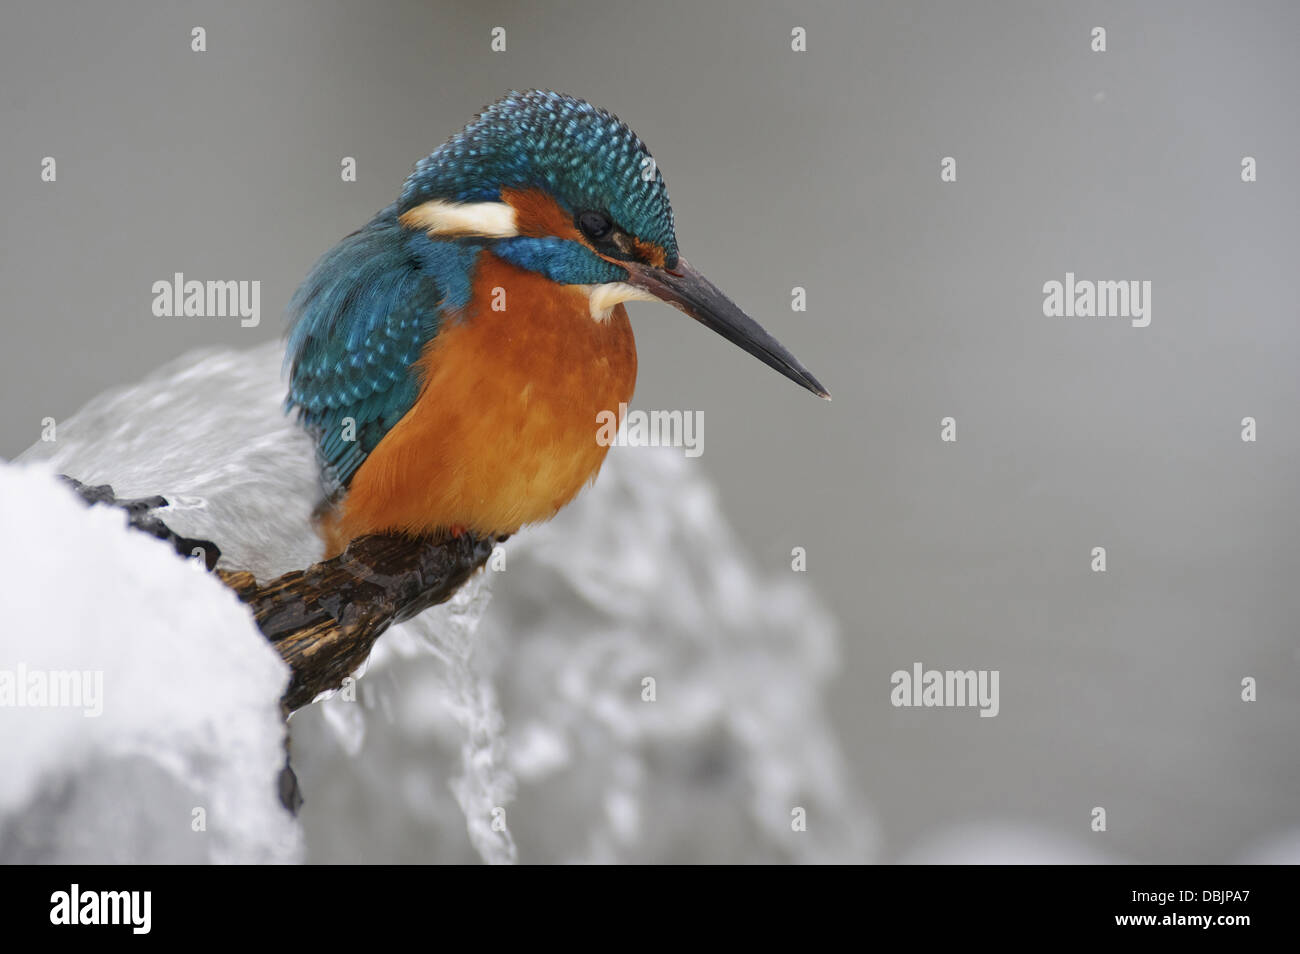 Kingfisher Alcedo atthis, commune, Basse-Saxe, Allemagne, Europe Banque D'Images